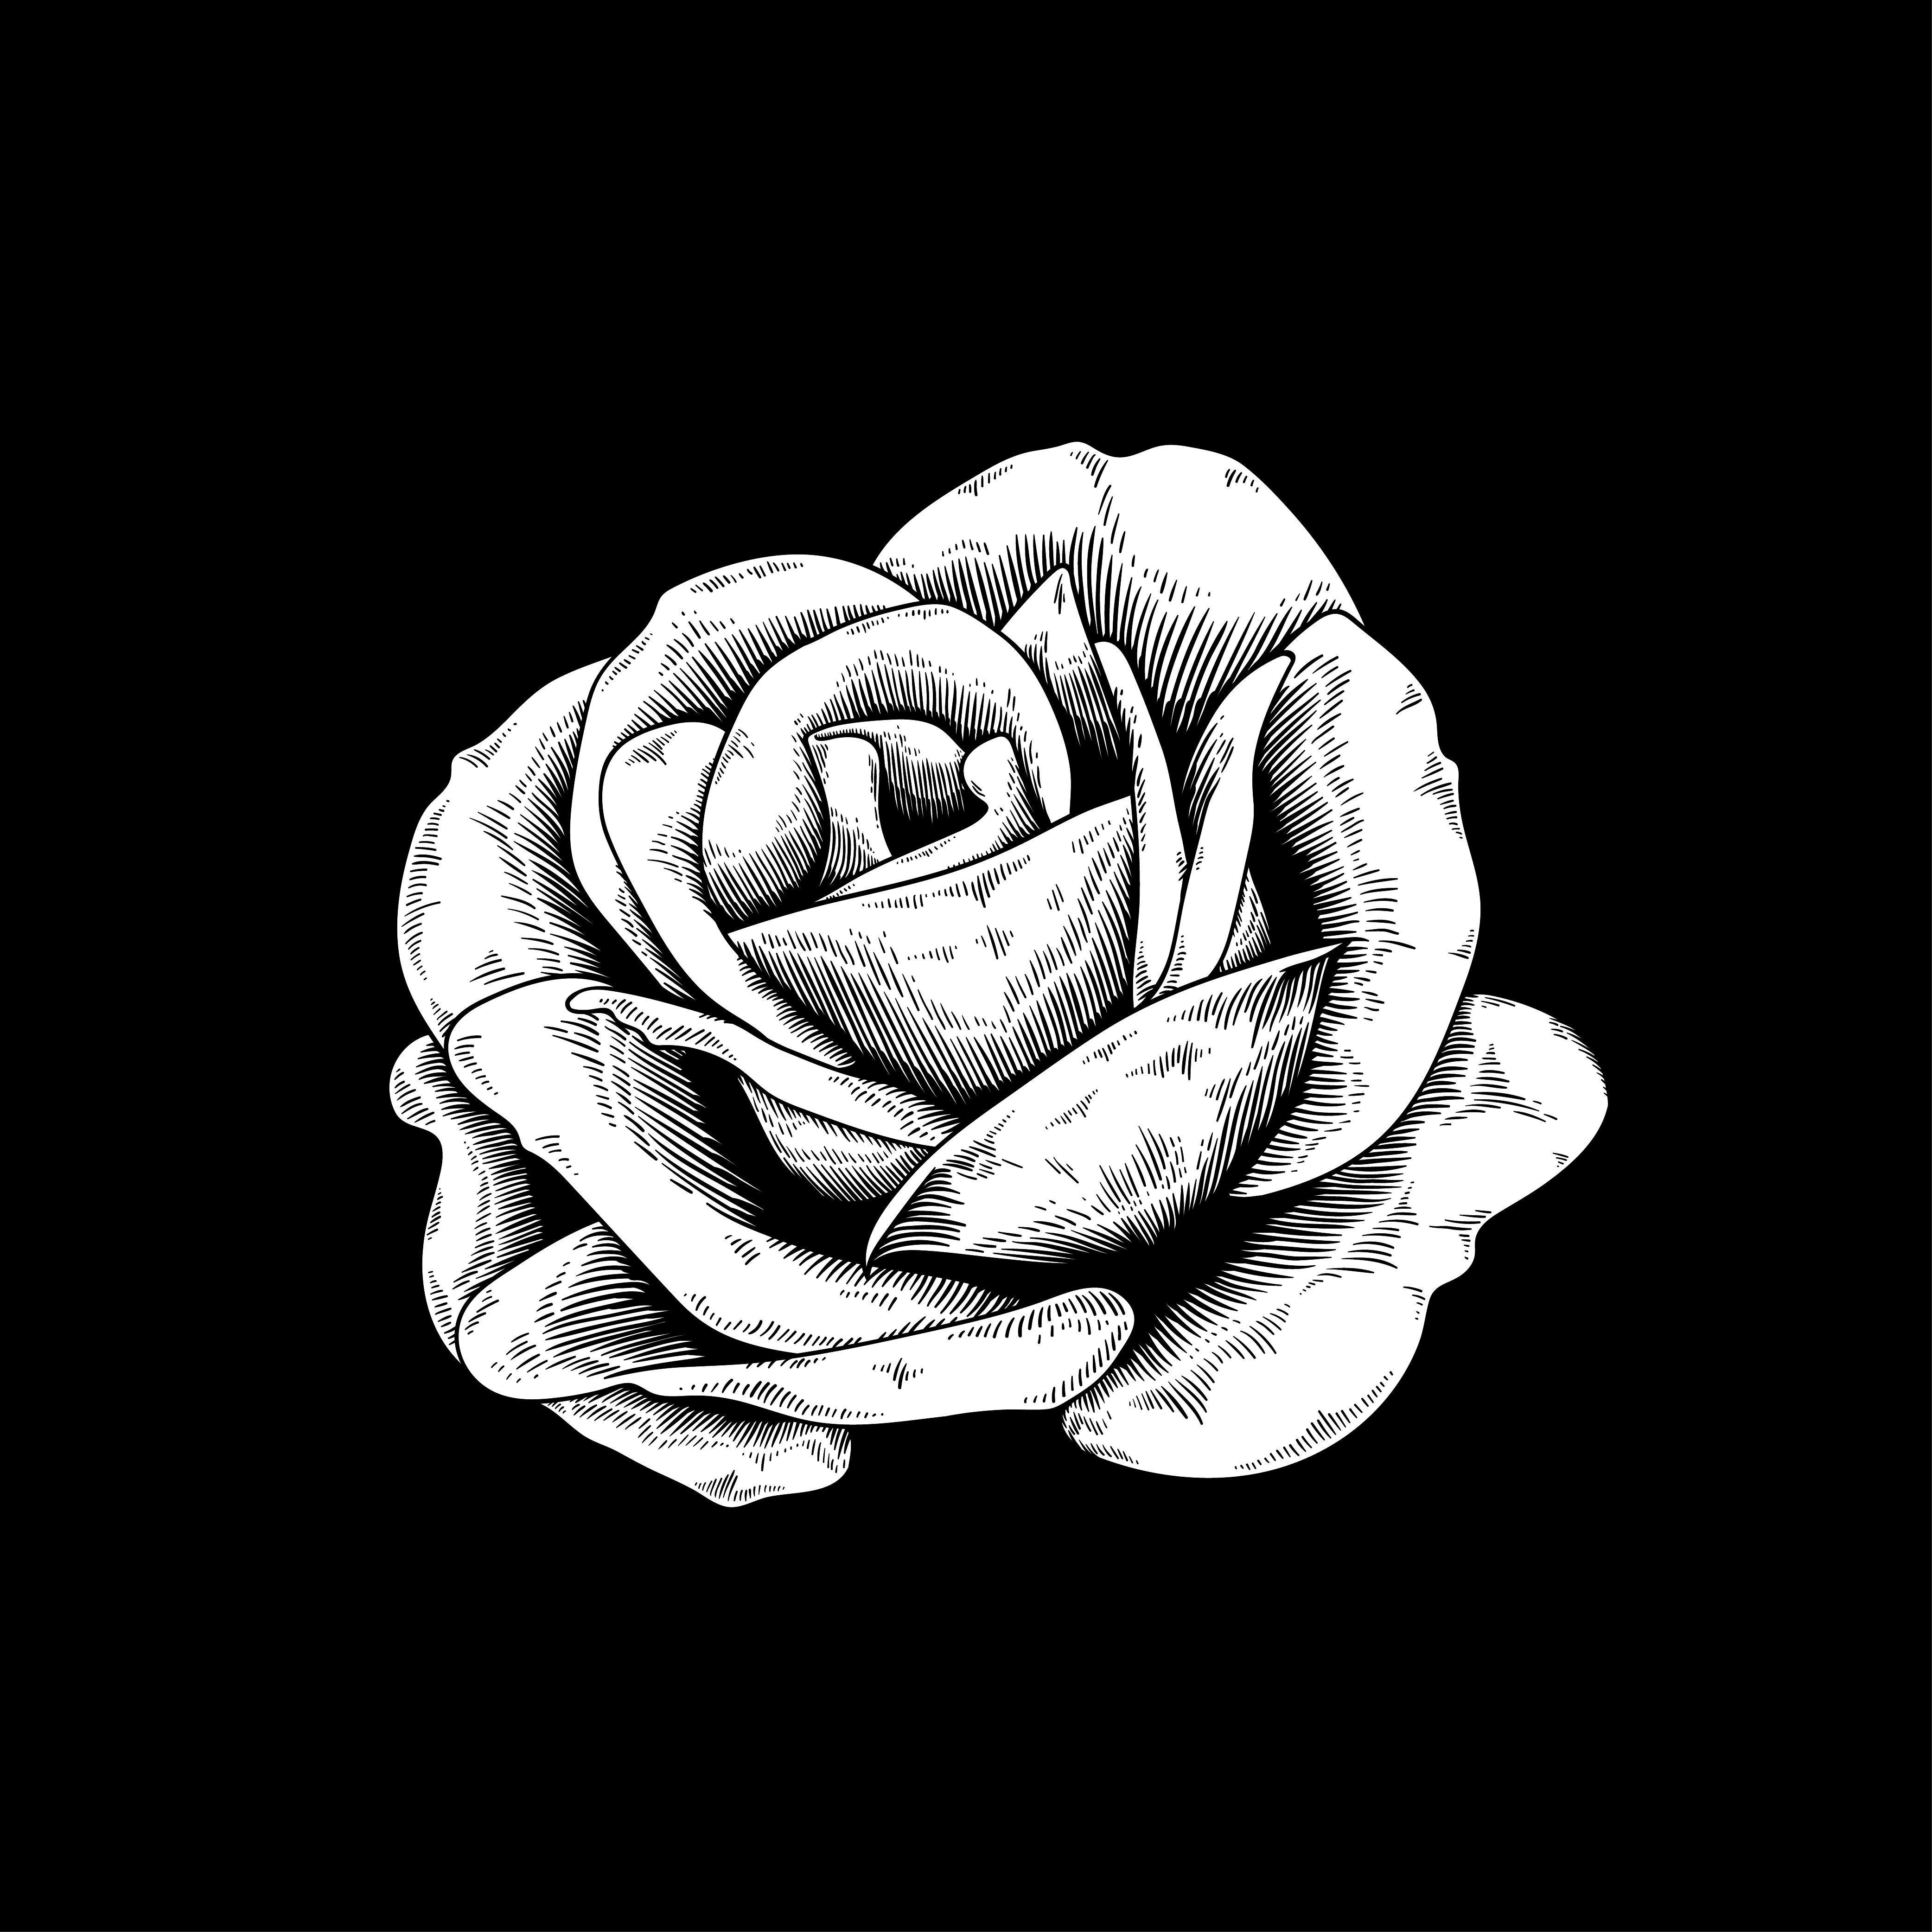 Rose drawing flower nature vector icon on black background - Download ...